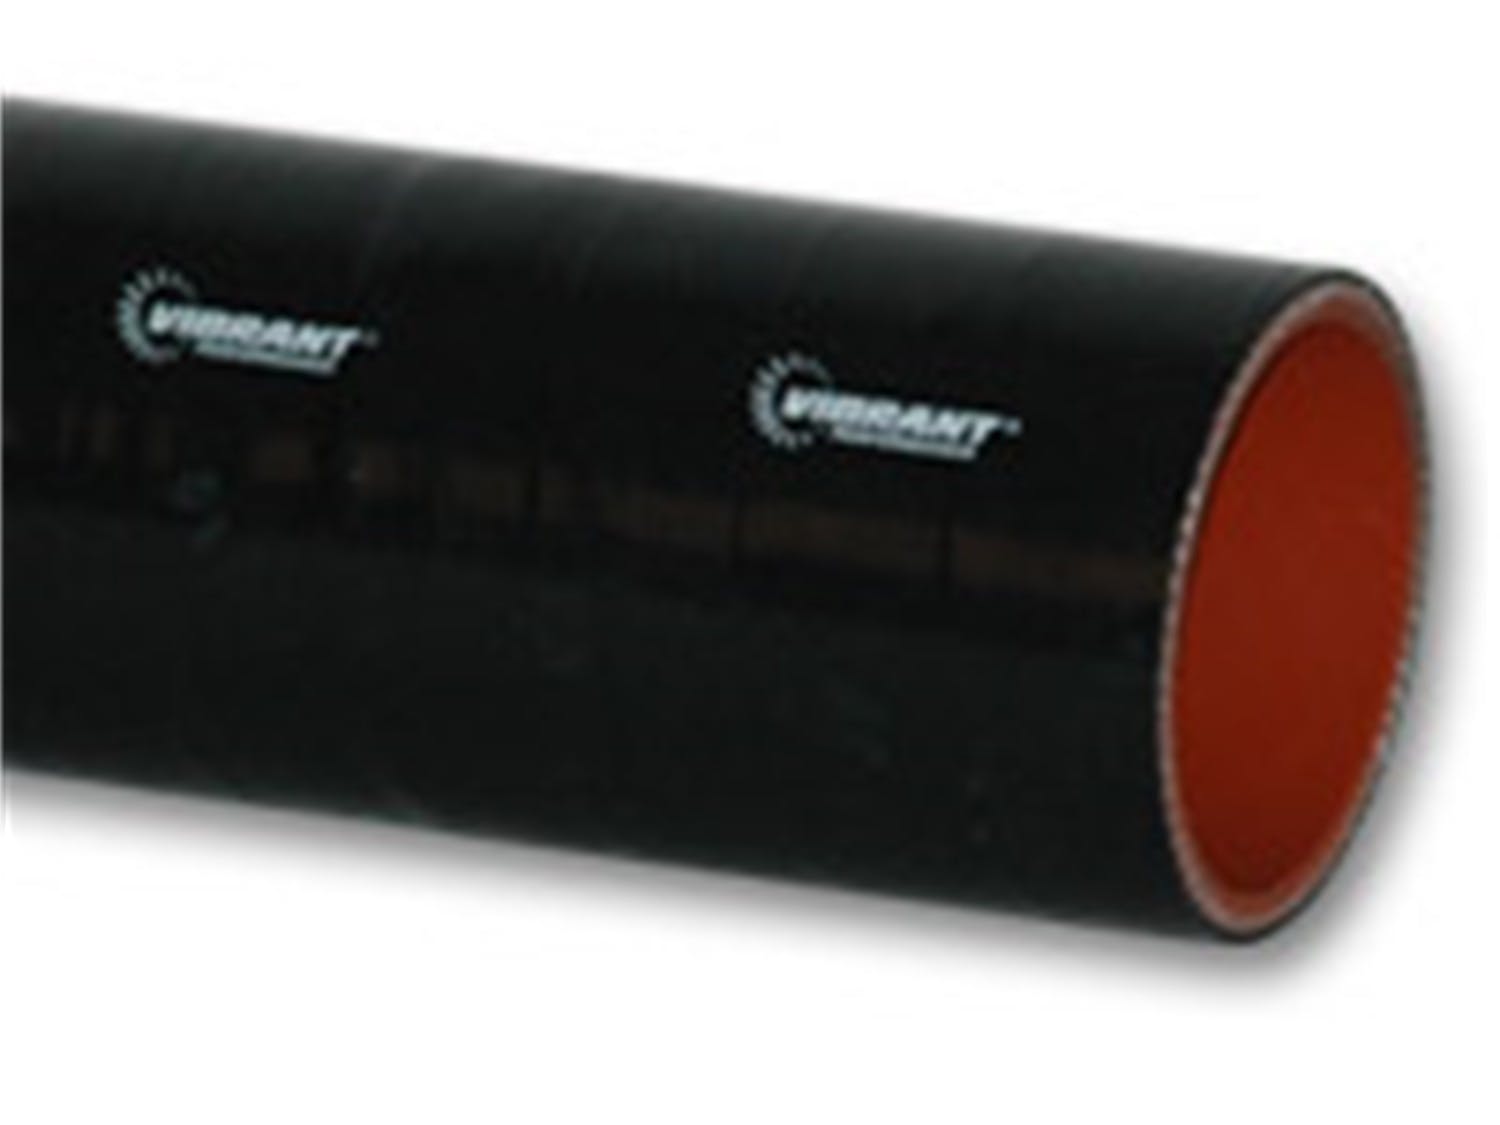 Vibrant Performance 2705 4 Ply Silicone Sleeve, 1.75 inch I.D. x 36 inch Long - Black